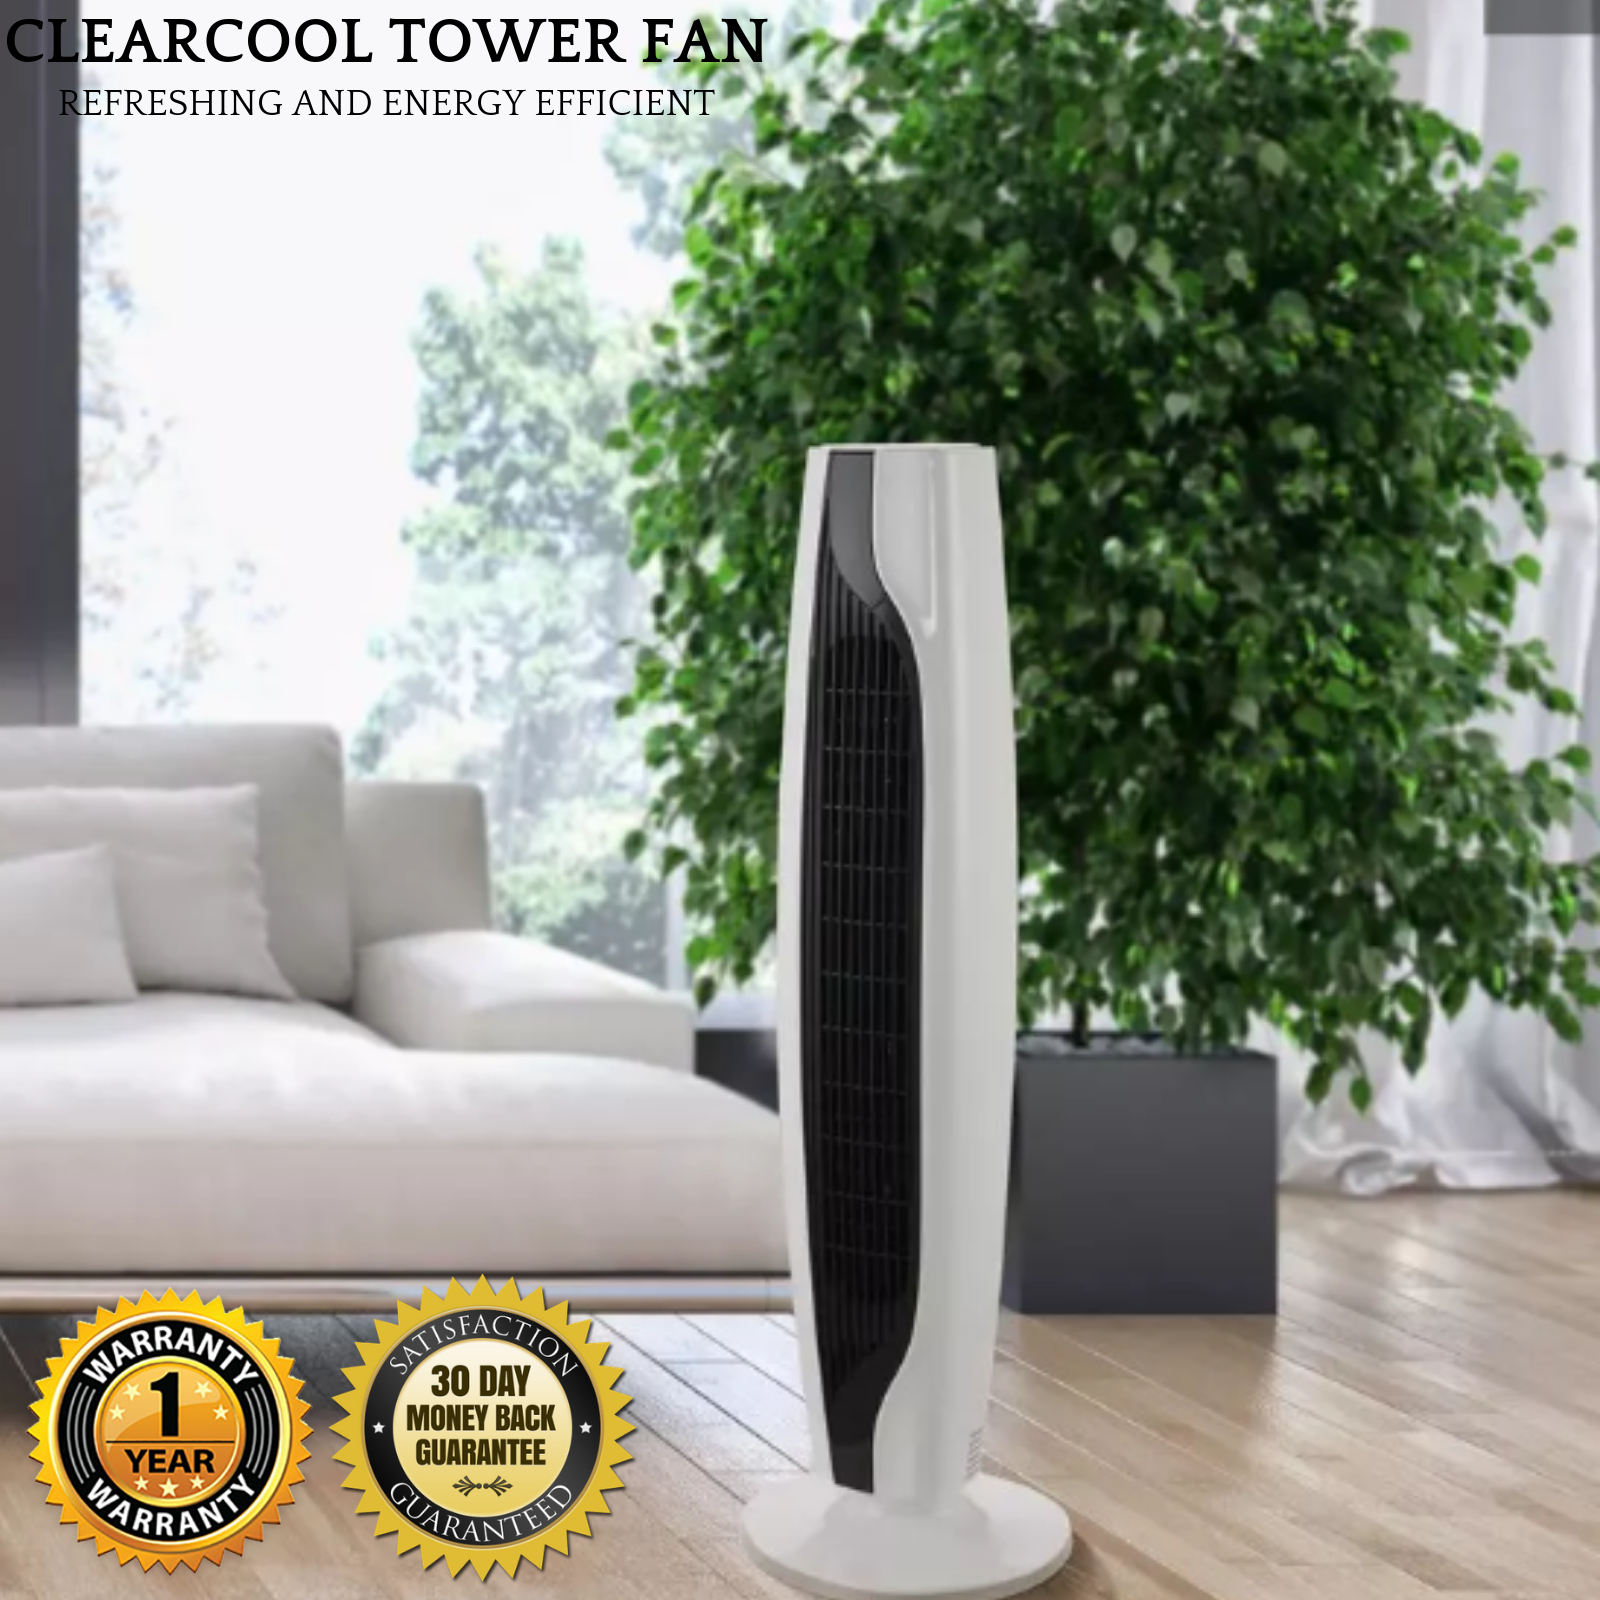 Details About Kogan Clear Cool Tower Fan New Portable Oscillating Touch Fan Wremote Control inside measurements 1600 X 1600